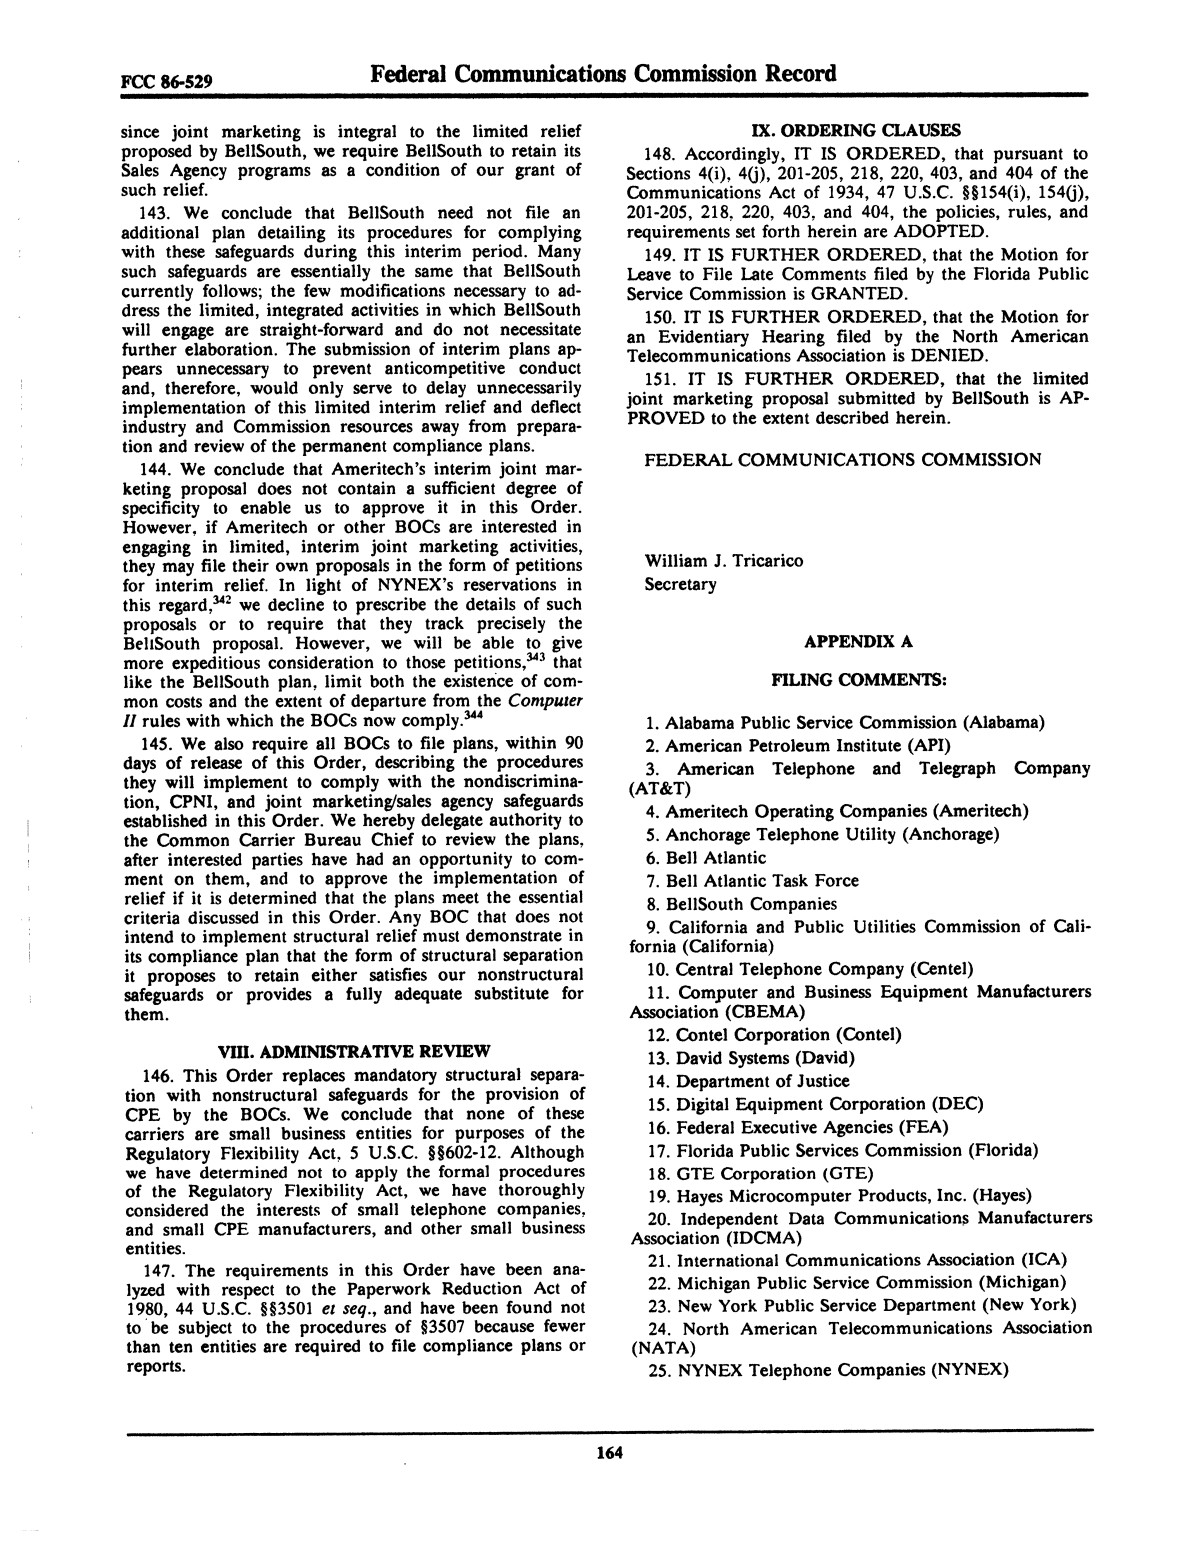 FCC Record, Volume 2, No. 1, Pages 1 to 409, January 5 - January 16, 1987
                                                
                                                    164
                                                